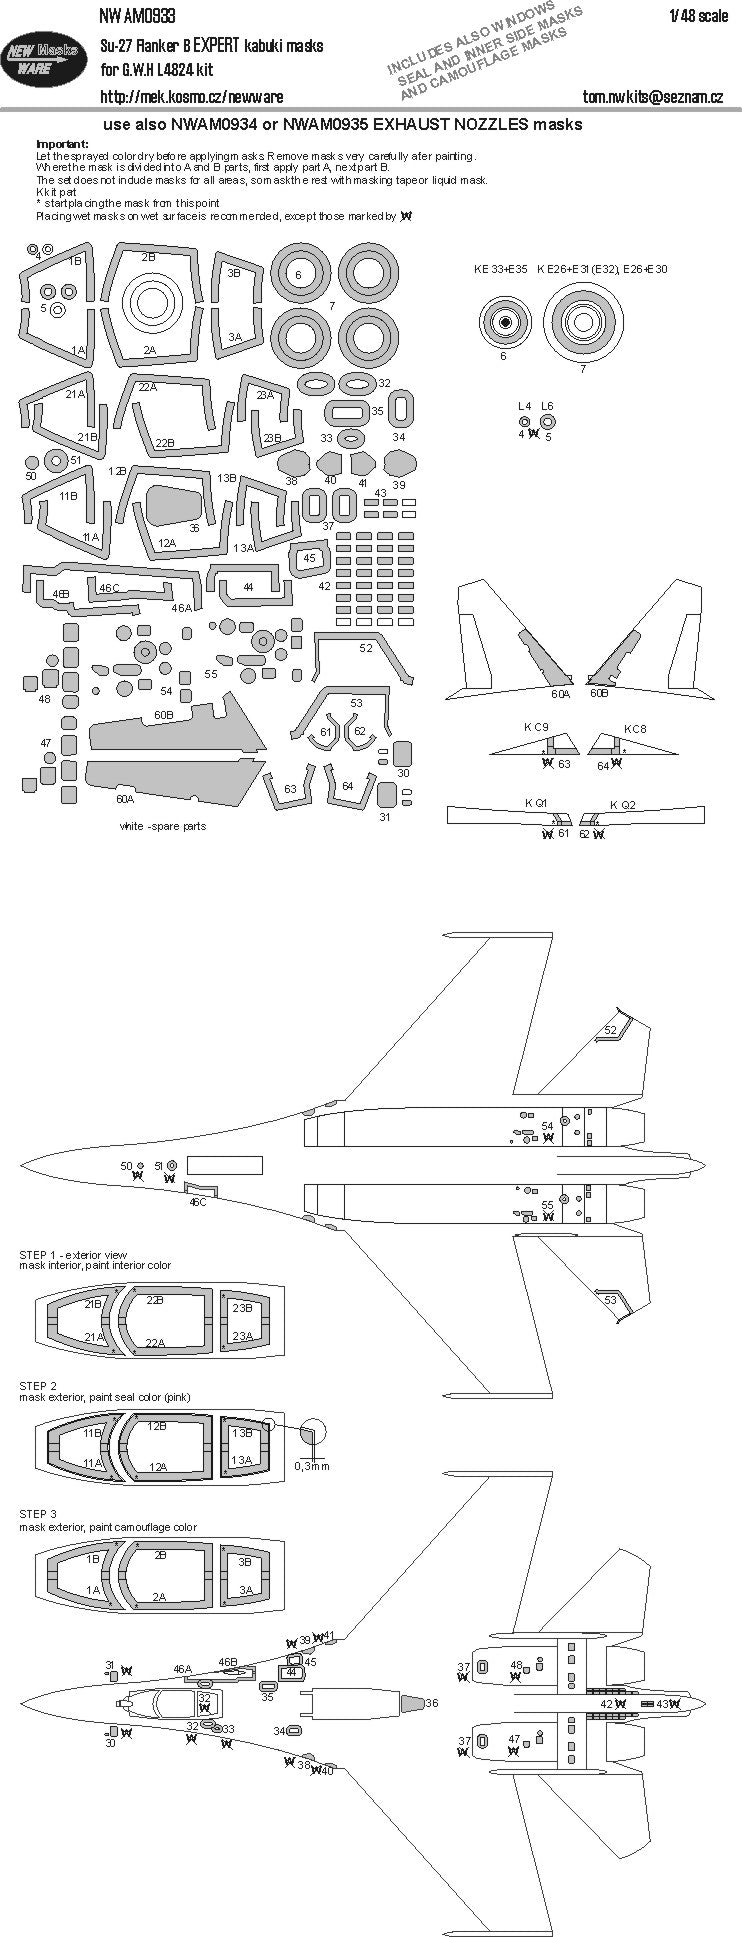 New Ware 0933 - Masking set for G.W.H 1/48 Su-27 Flanker B EXPERT